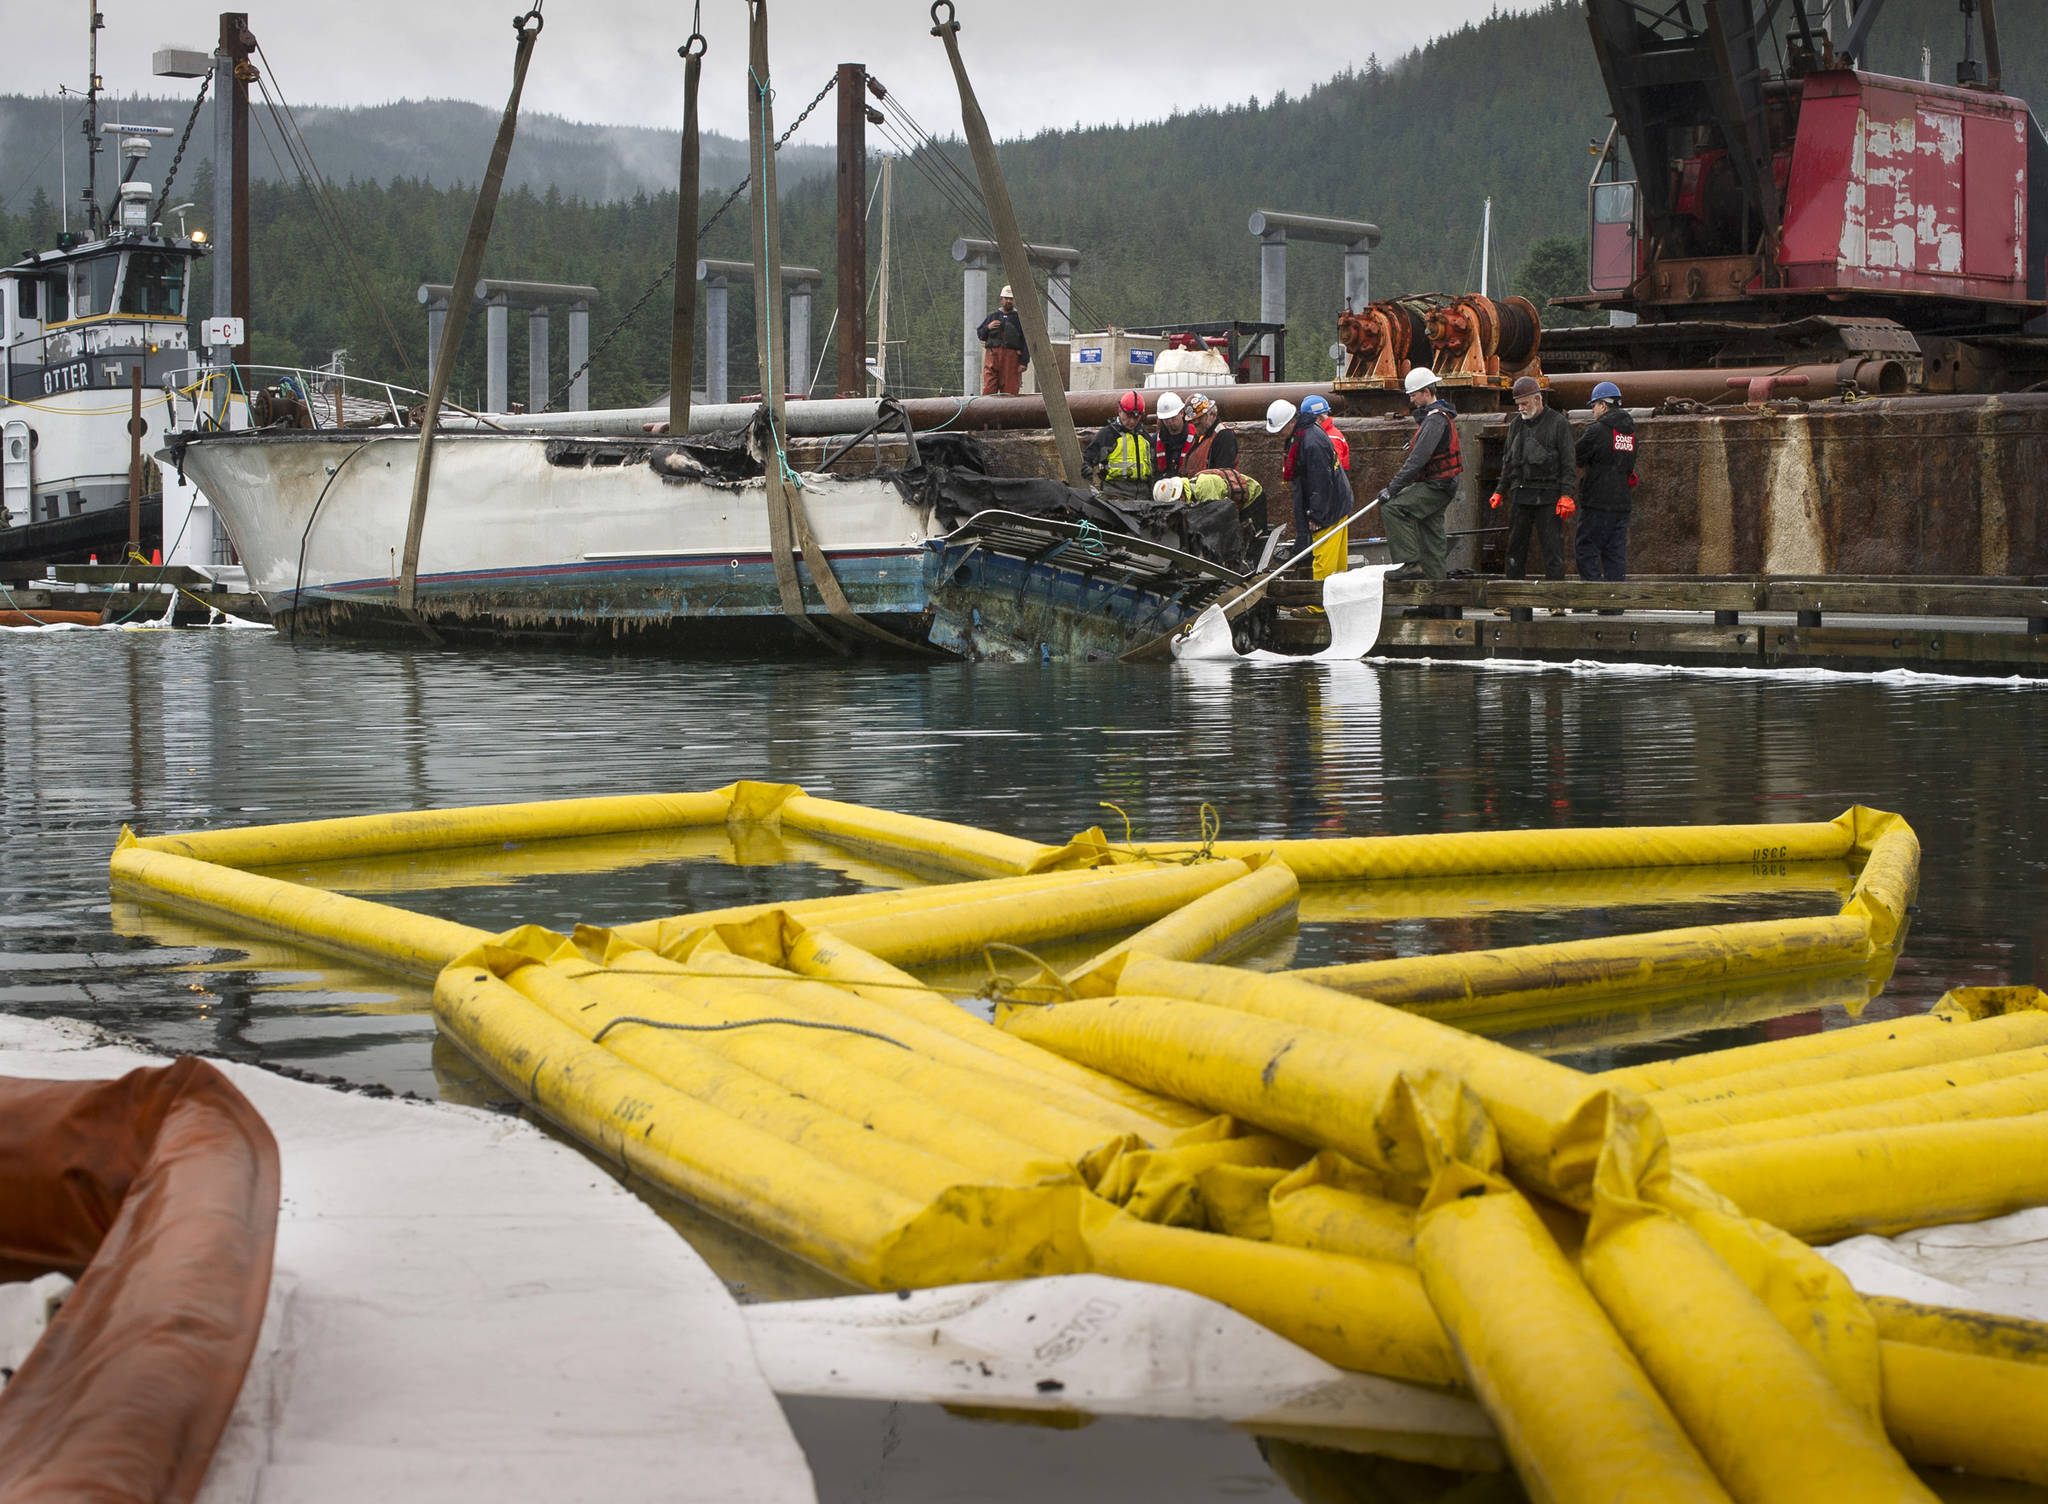 Michael Penn | Juneau Empire file  After the 42-foot boat Whimsea burned and sank in Don Statter Memorial Harbor in June, the federal Oil Spill Liability Trust Fund paid for cleanup and recovery of the boat. A tax supporting that fund is set to expire at the end of the year.